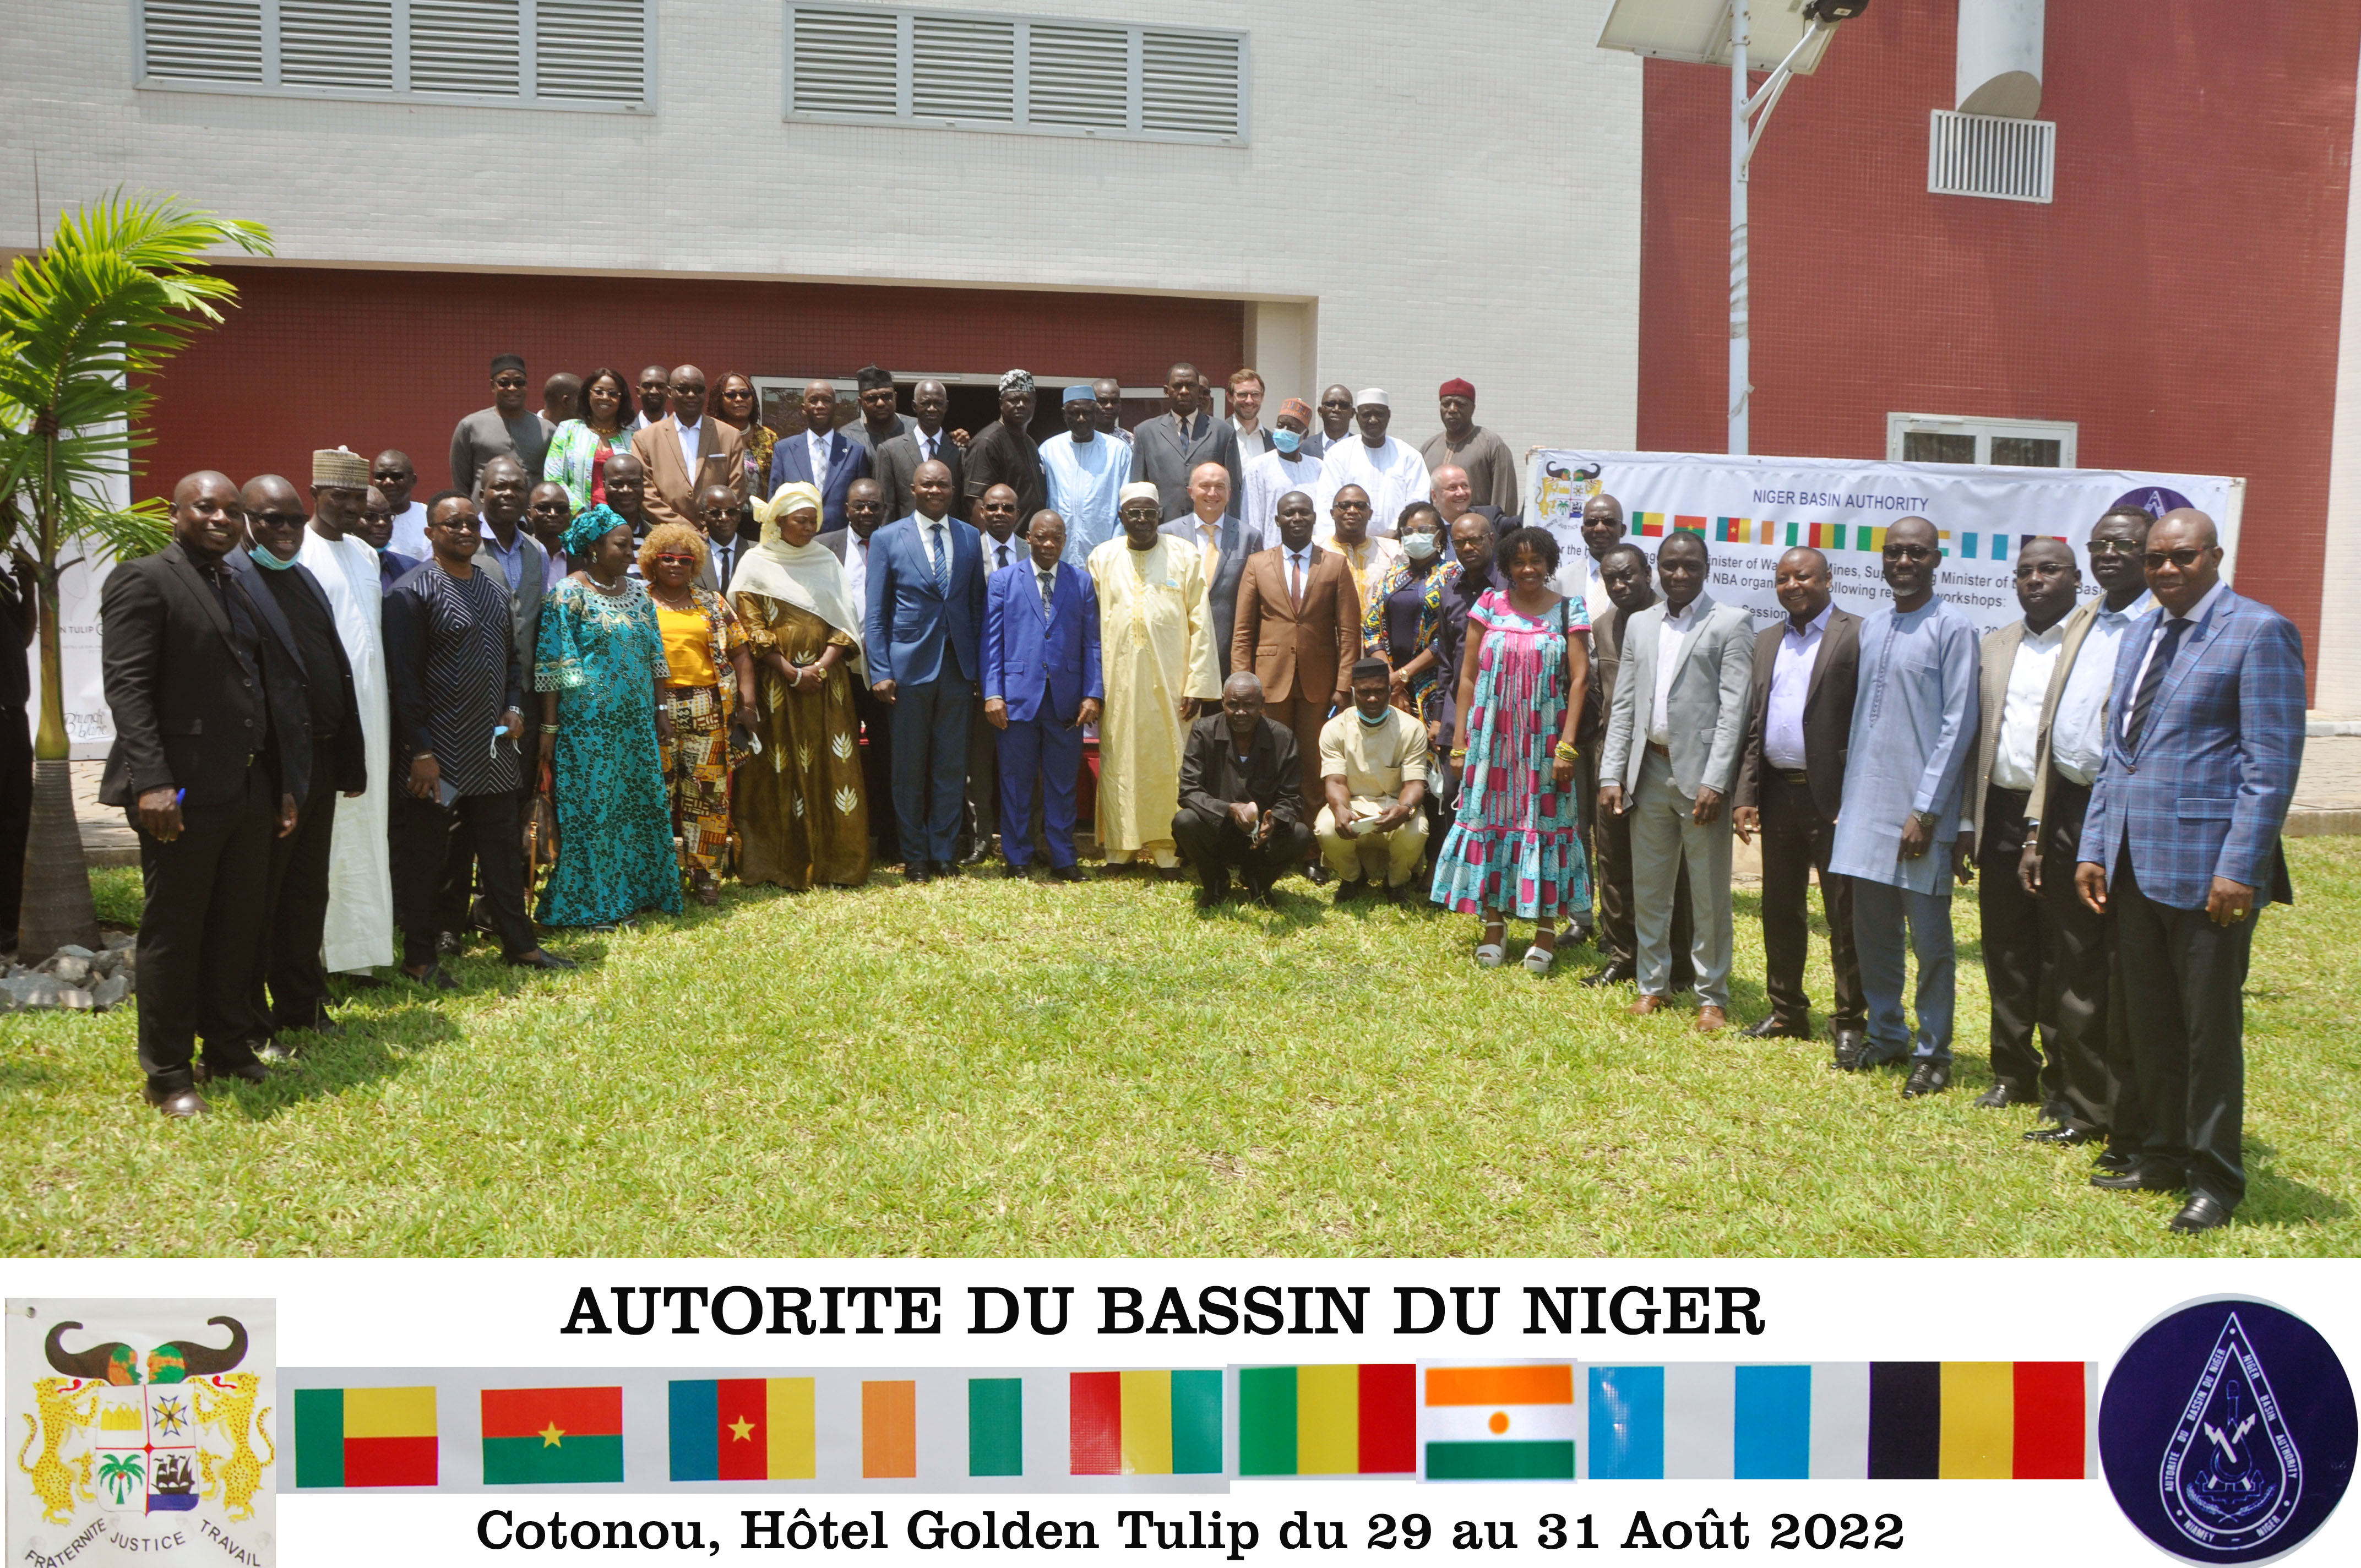  Cotonou hosts the 2022 session of the Regional Steering Committee for projects and programs of the Niger Basin Authority, August 29-31, 2022